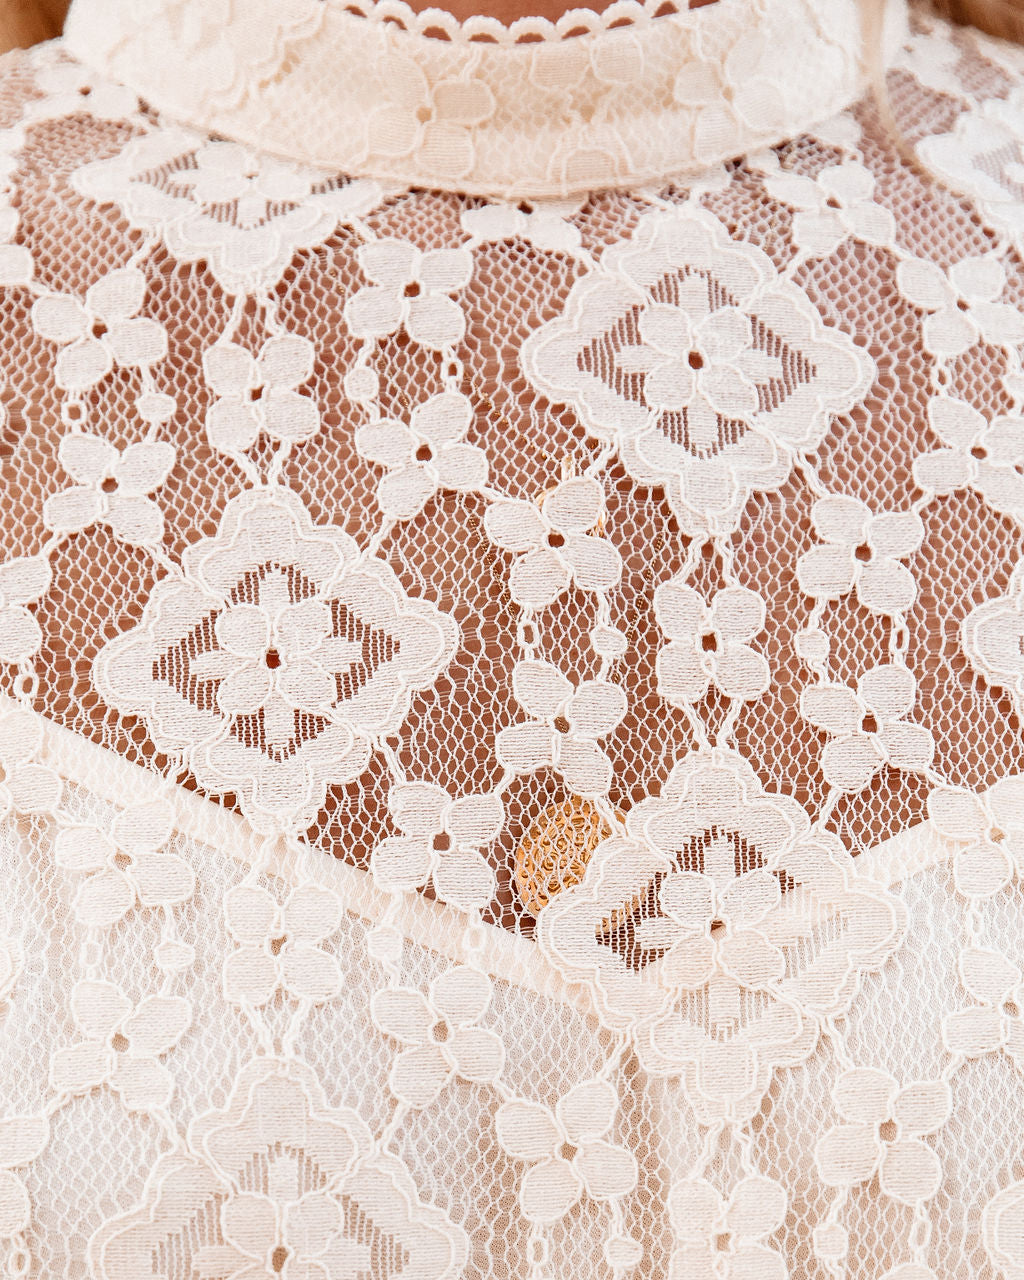 Meridian Lace Blouse - Cream Ins Street